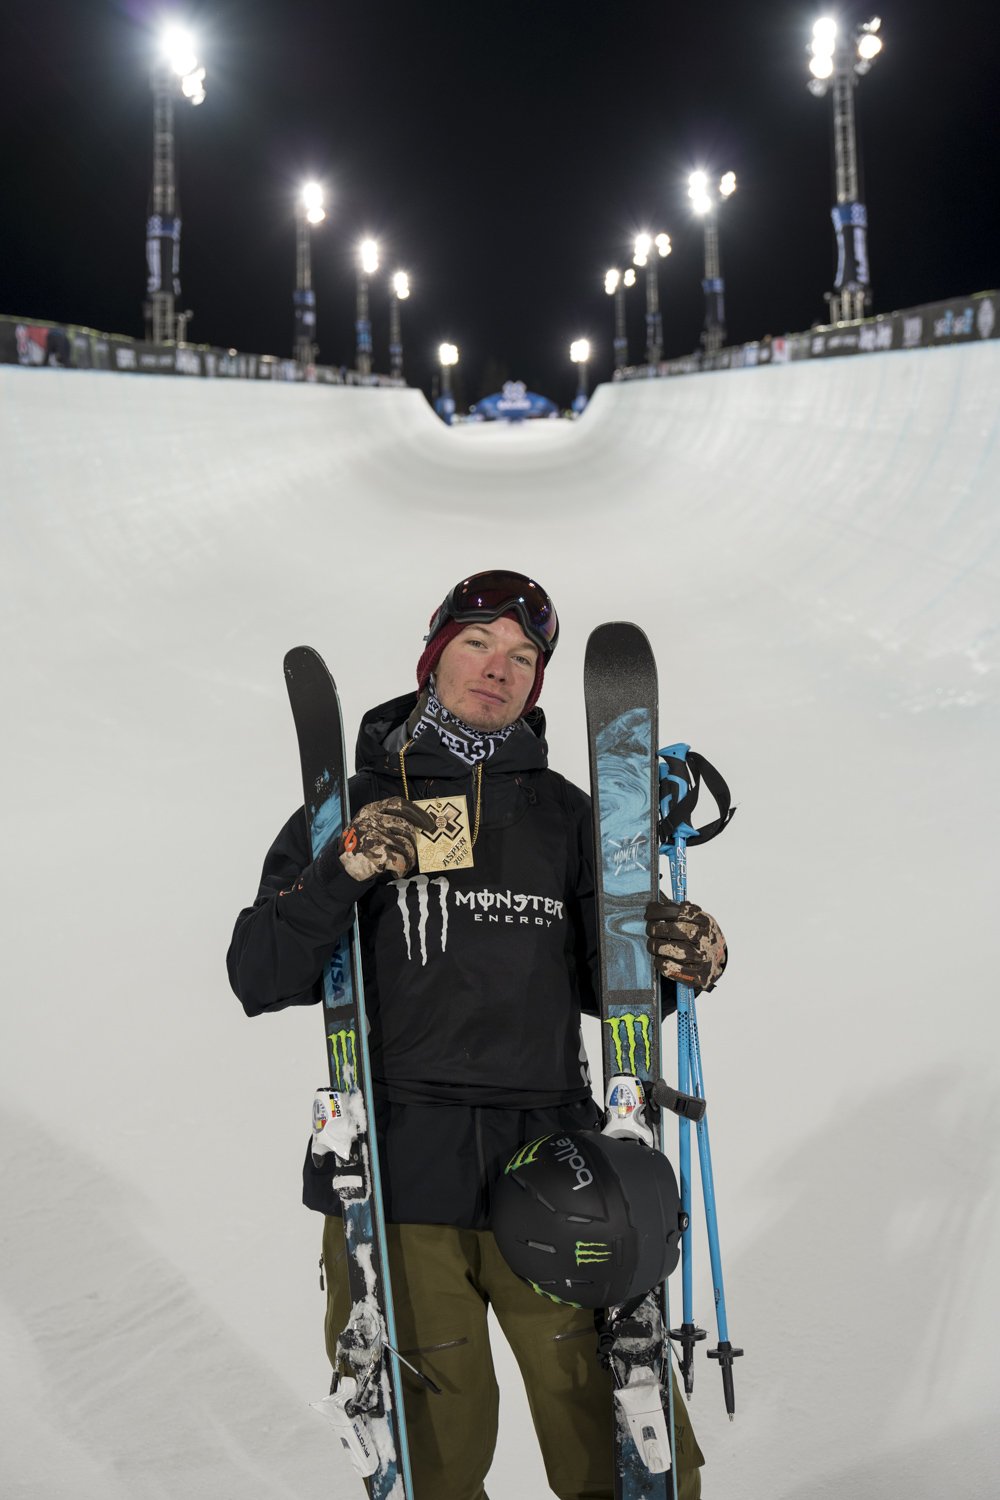 Monster Energy's David Wise is Ready to Compete in Men's Ski SuperPipe at X Games Aspen 2021